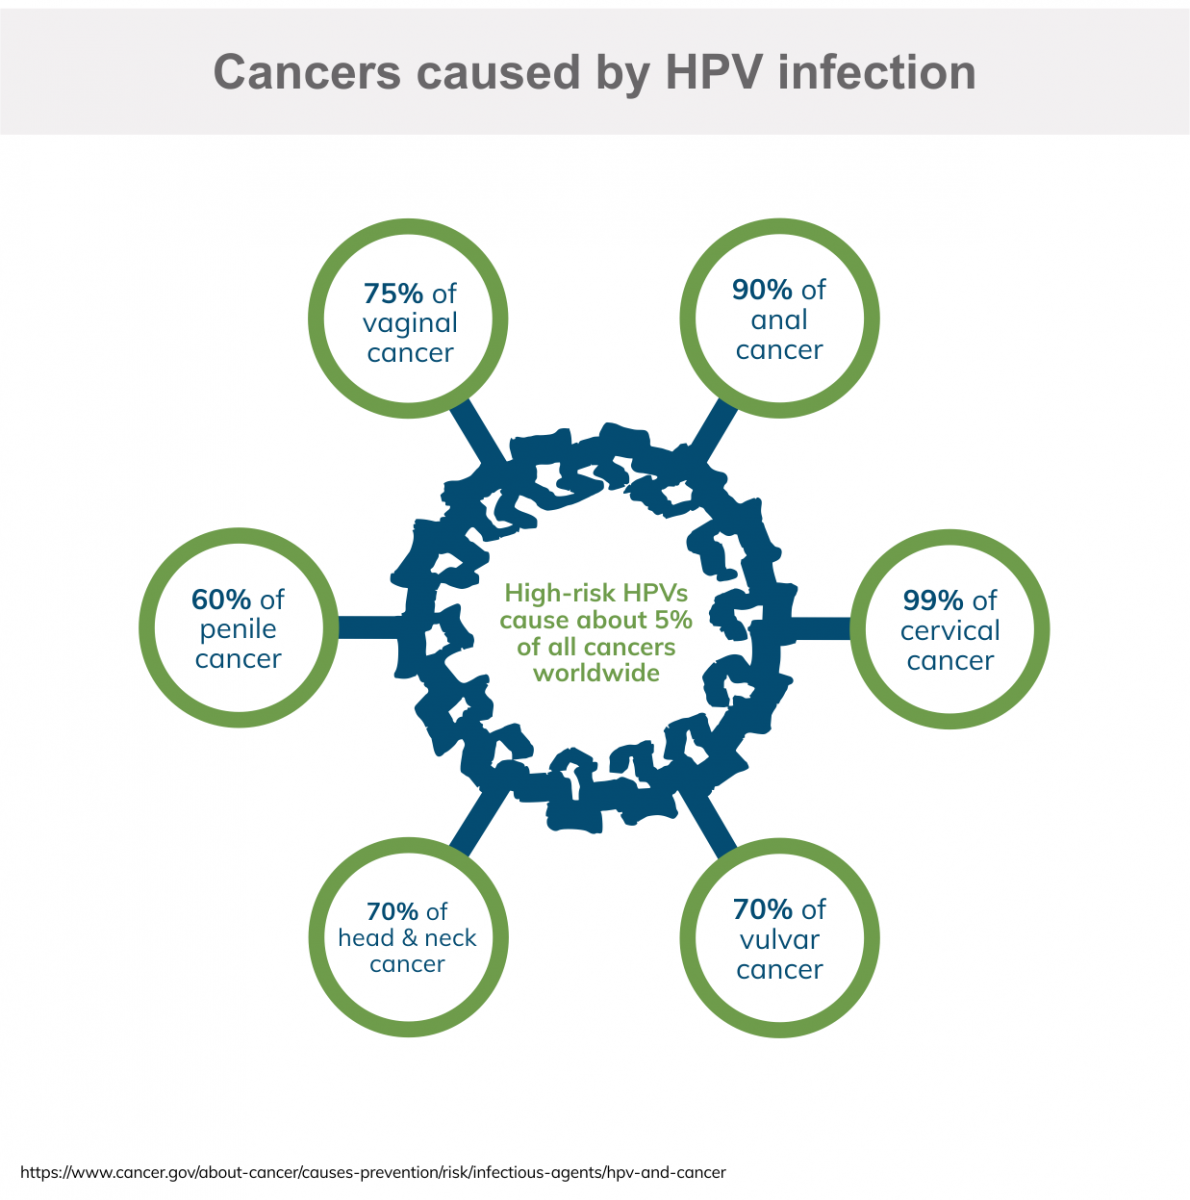 hpv causes what kind of cancer